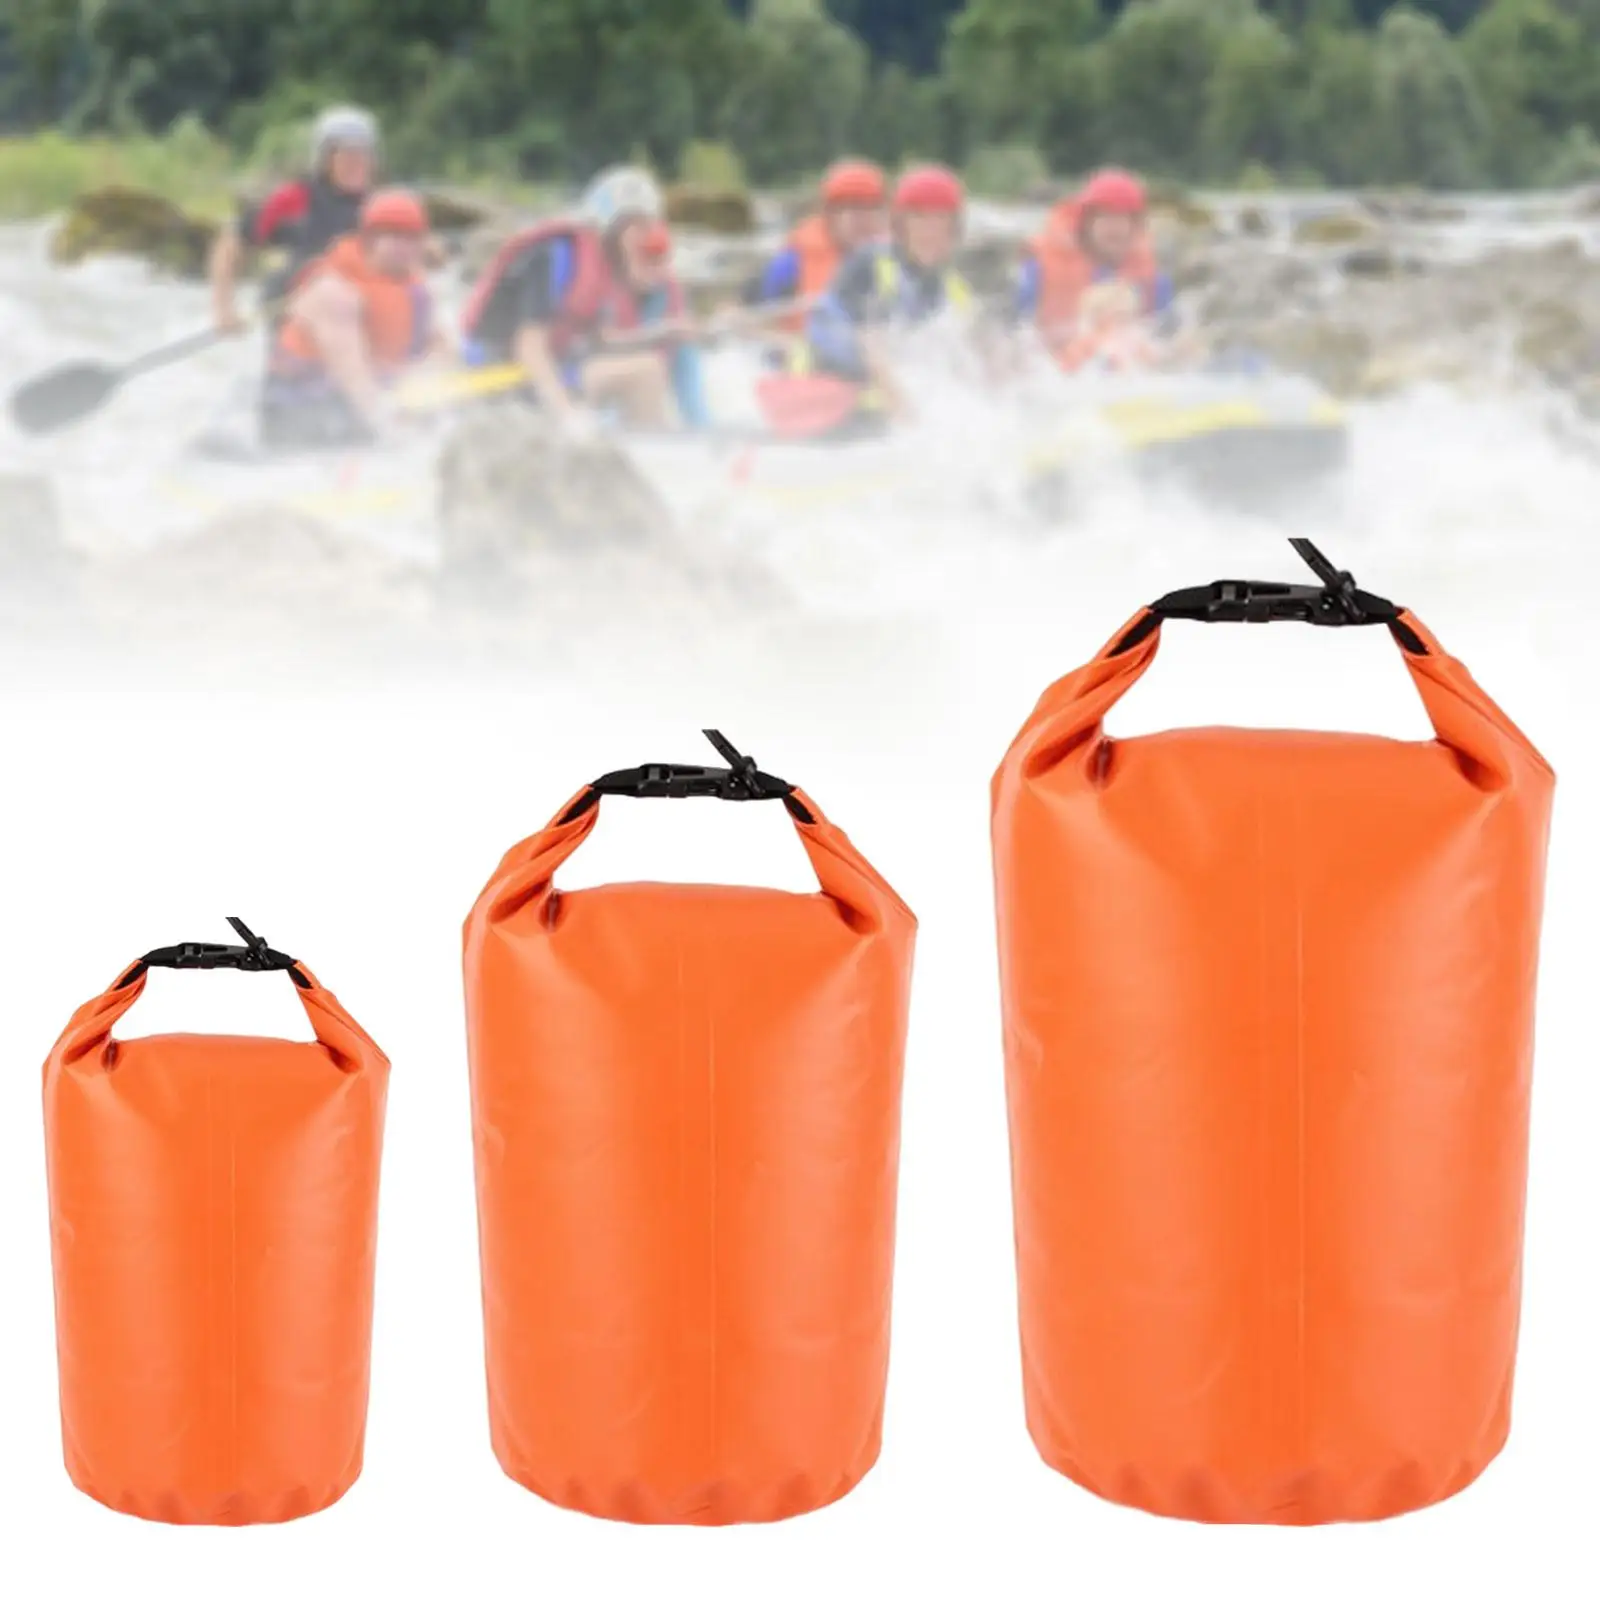 3Pcs Dry Sacks Storage Waterproof Dry Bags Floating Pouch Keeps Gear Dry for Water Sports Camping Fishing Swimming Kayaking